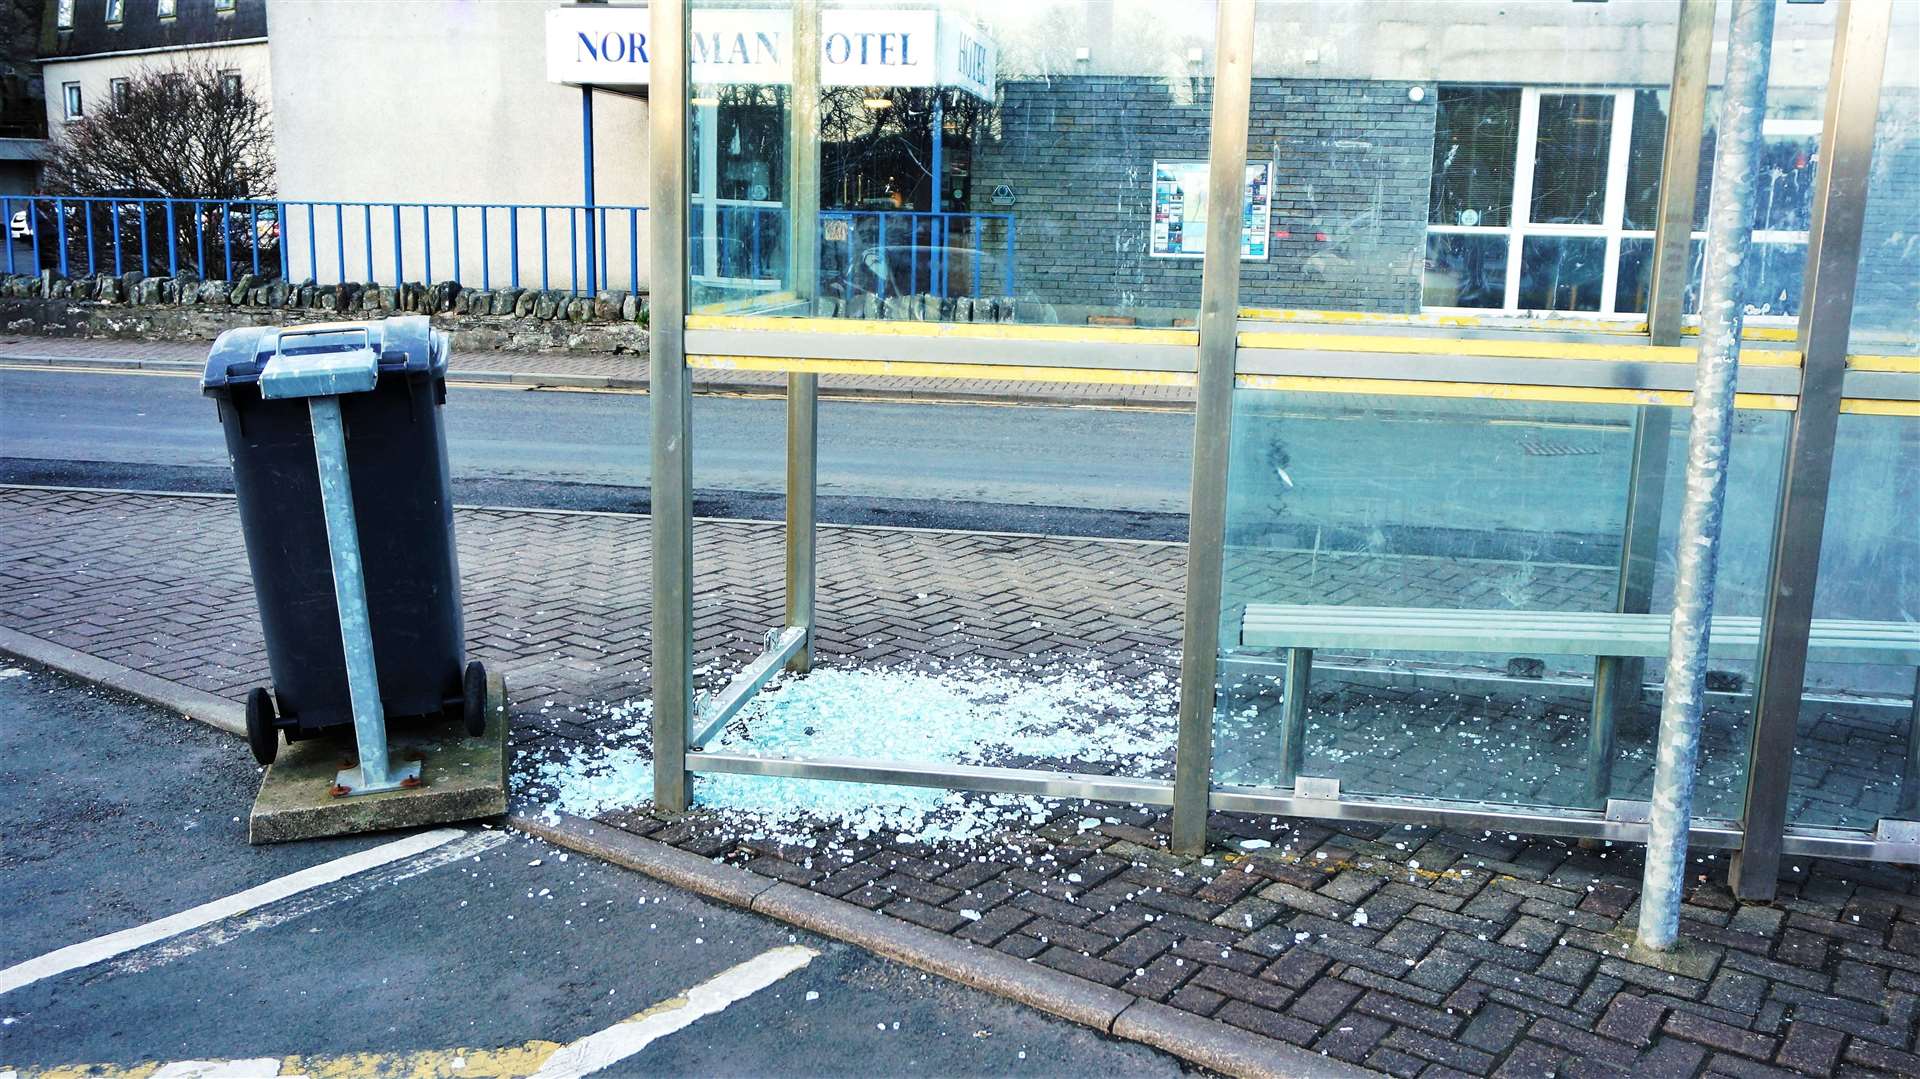 The bus shelter has been described as "the worst" in Caithness.